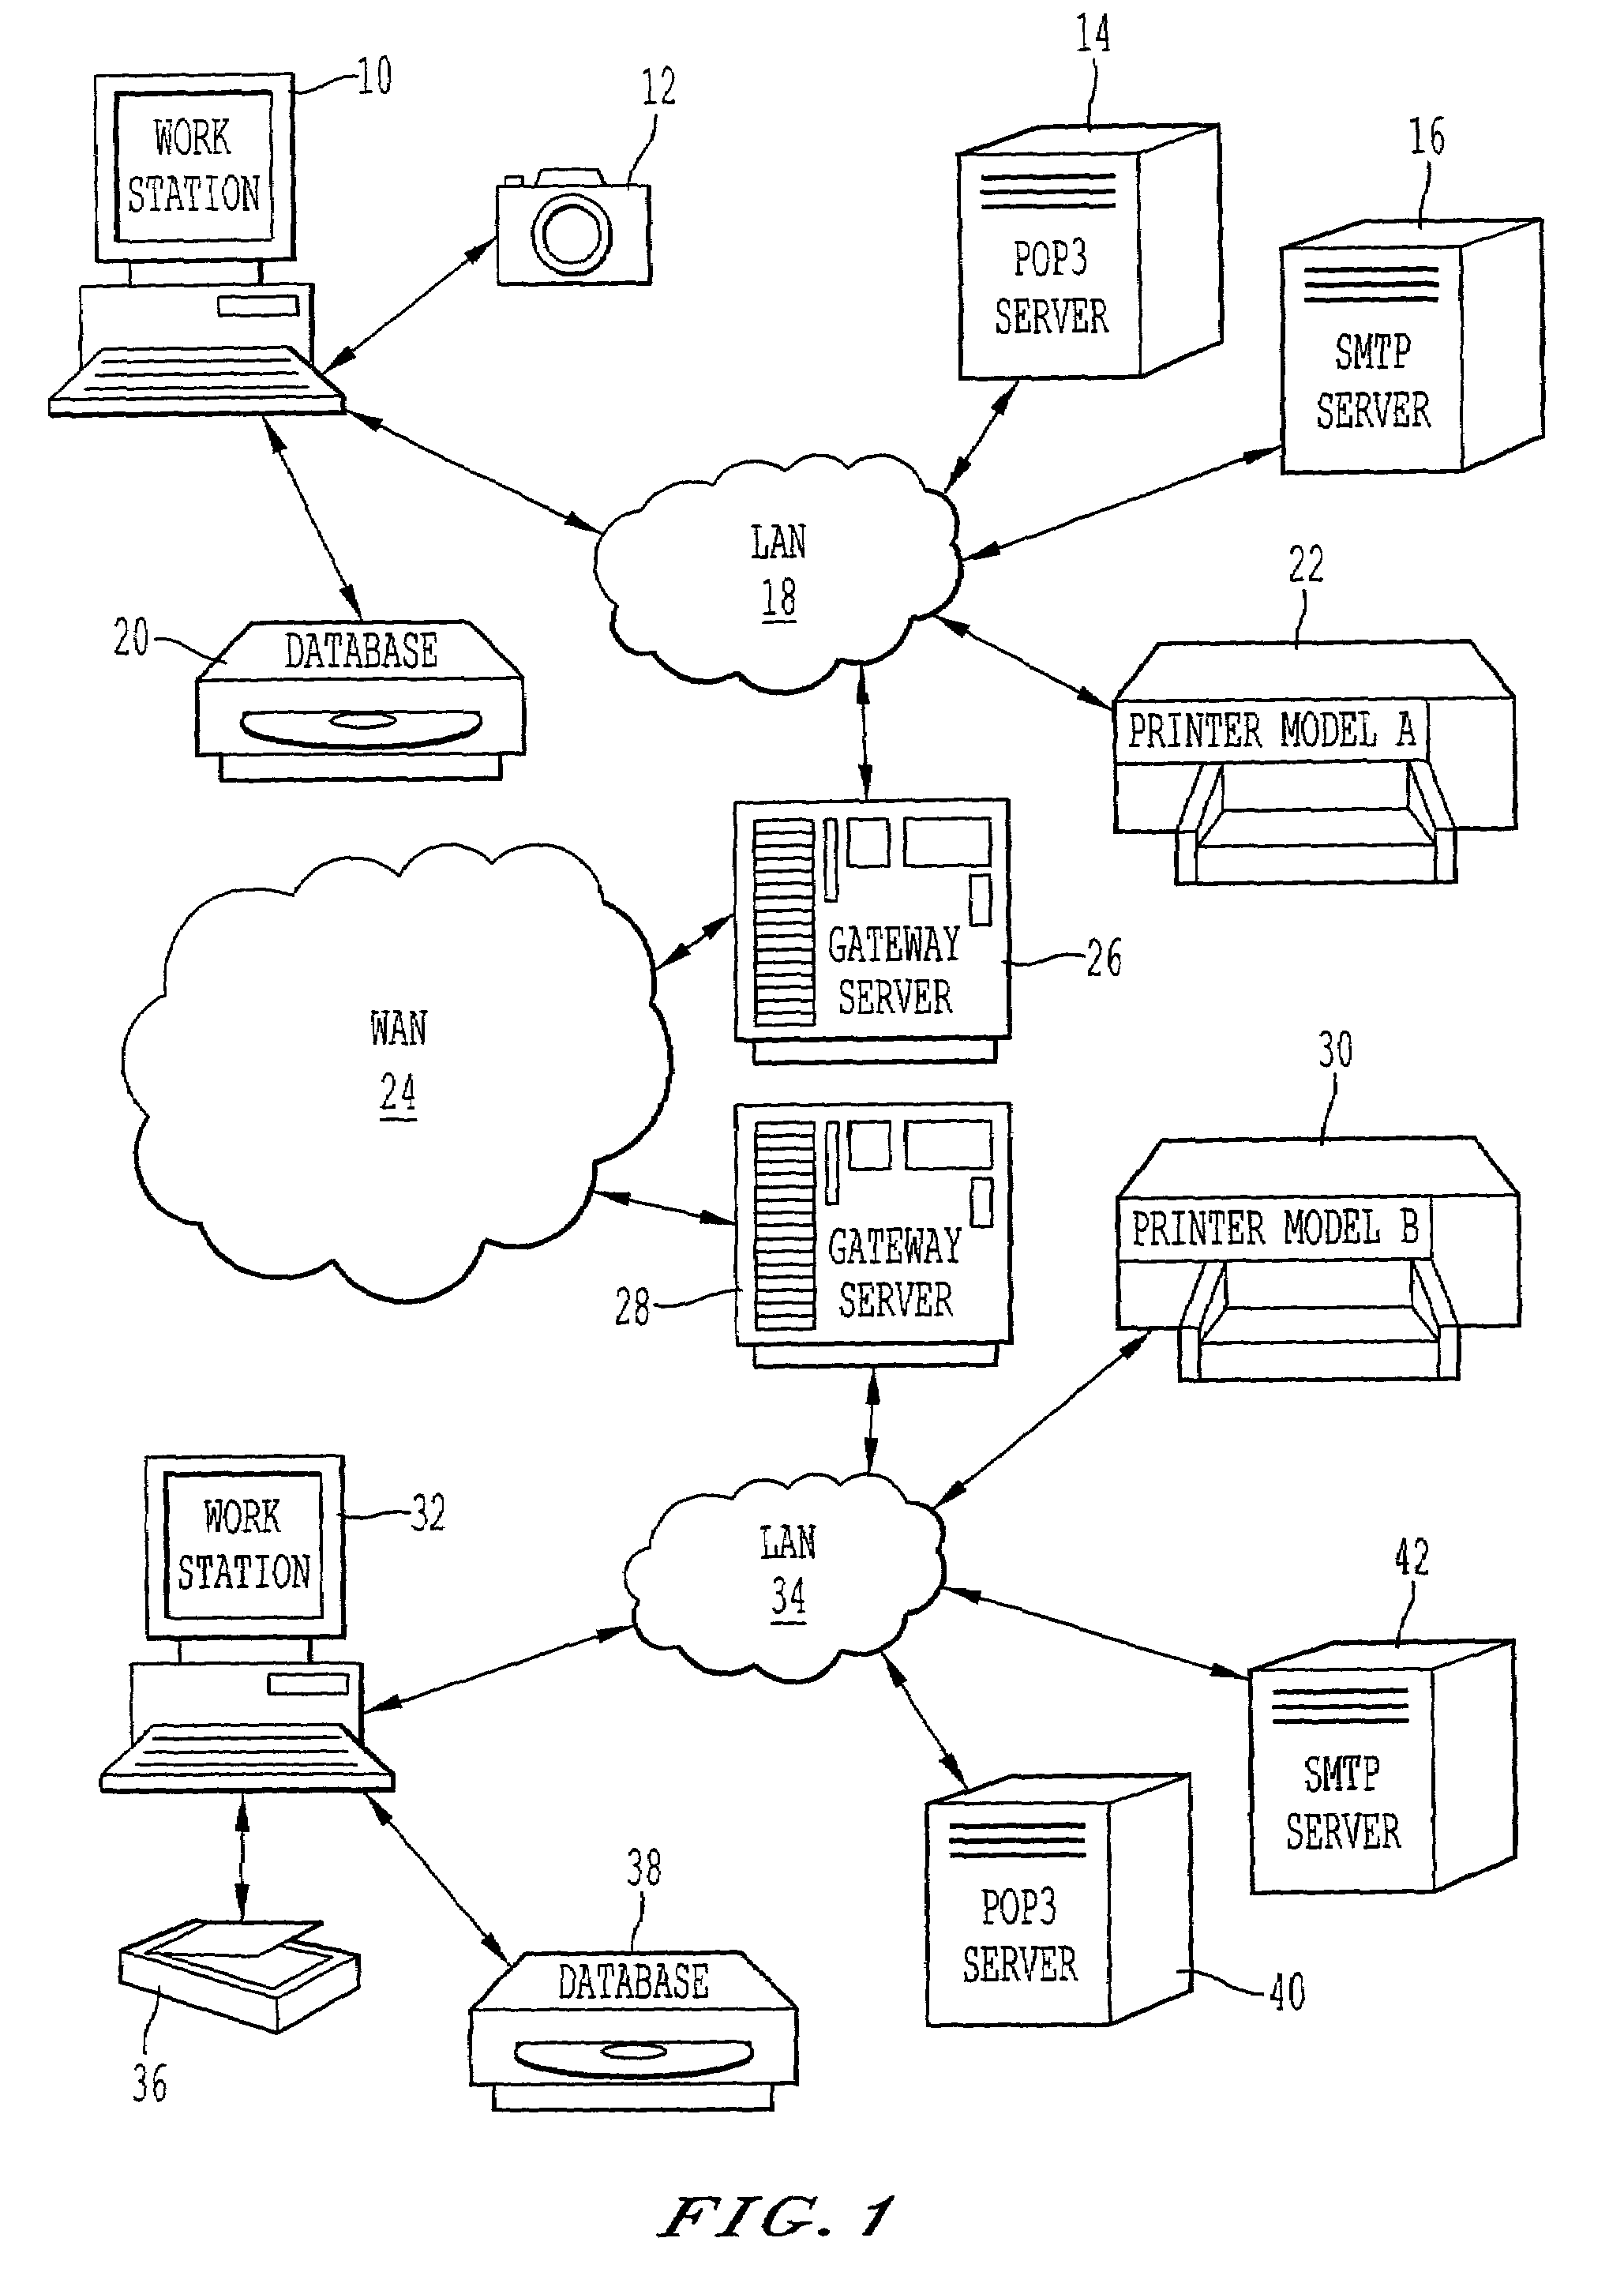 Method for obtaining an identifier of a monitored device